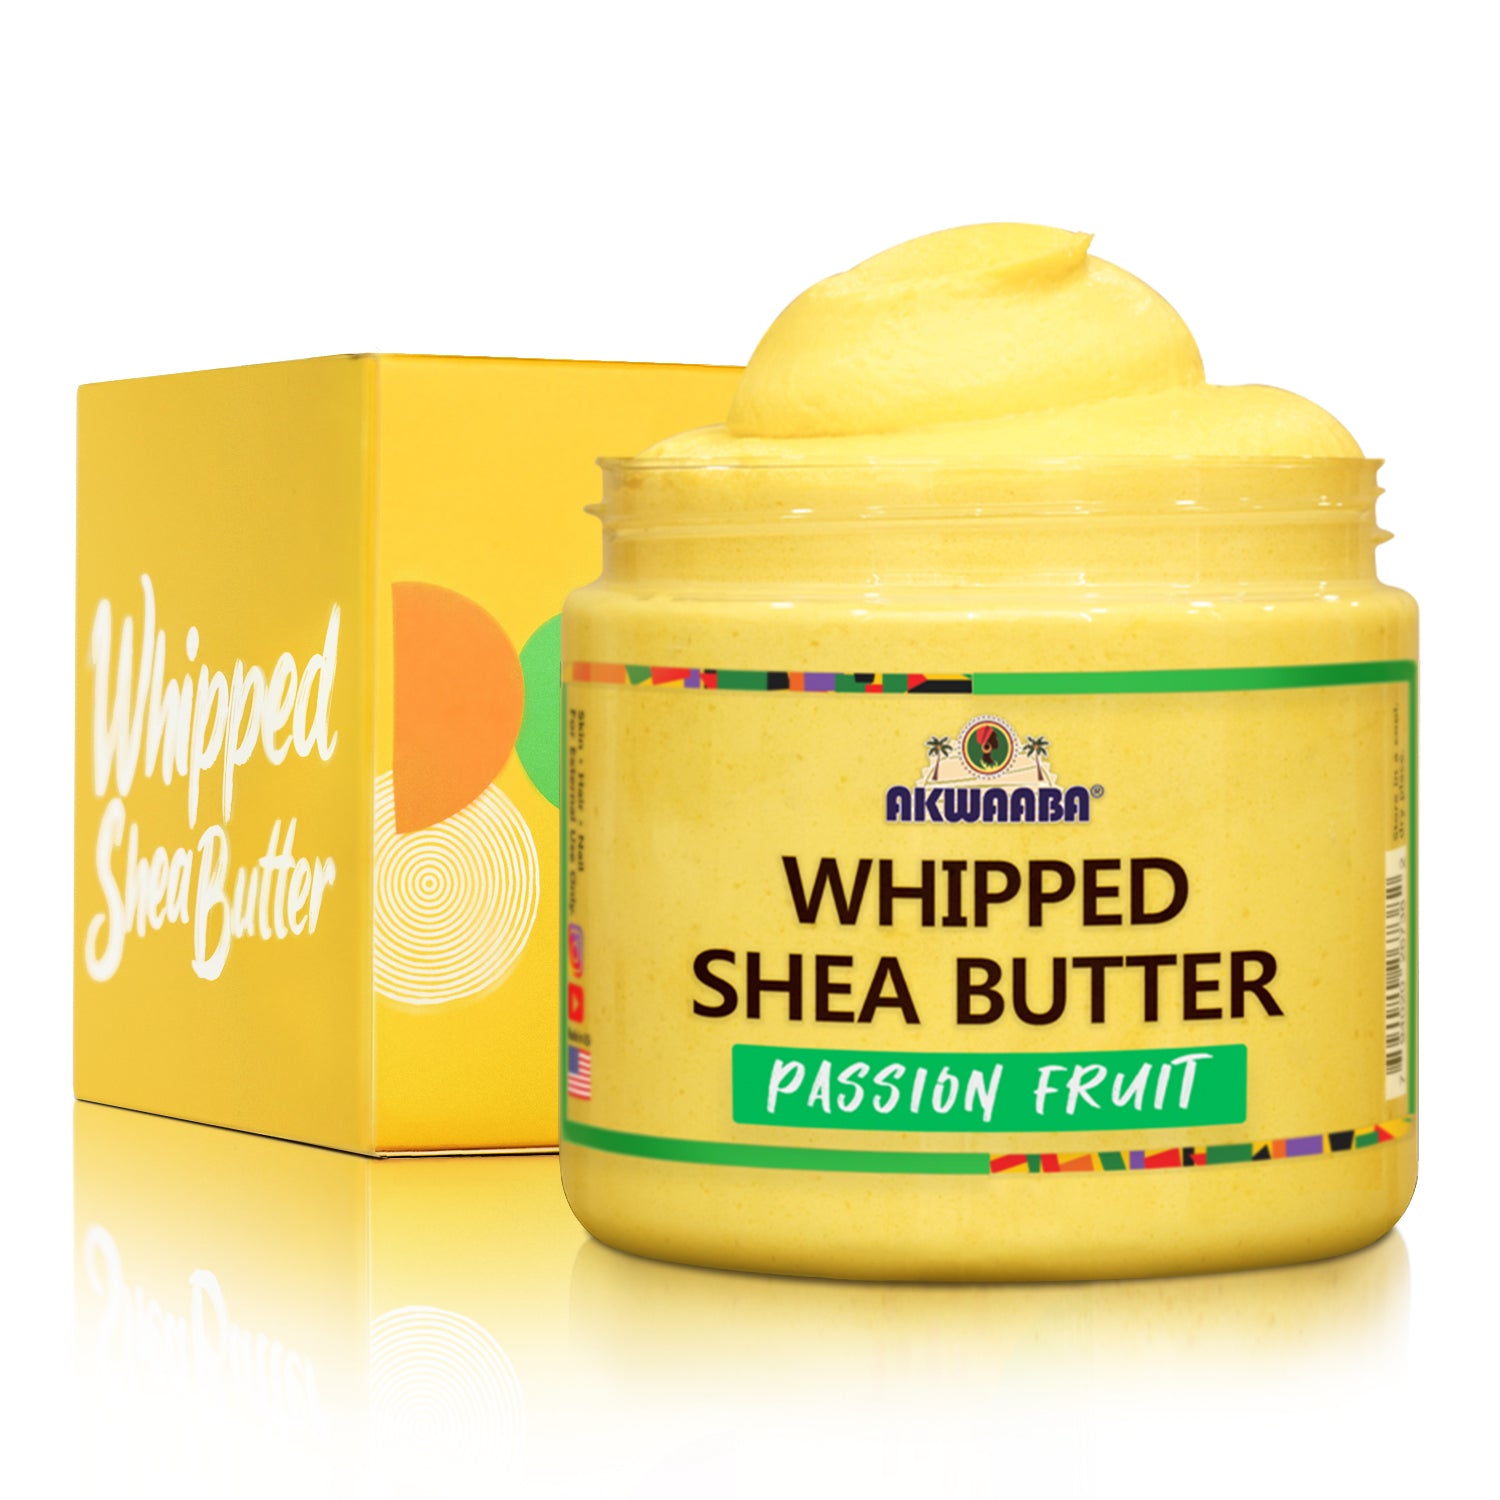 AKWAABA Whipped Shea Butter(Passion Fruit) 12oz